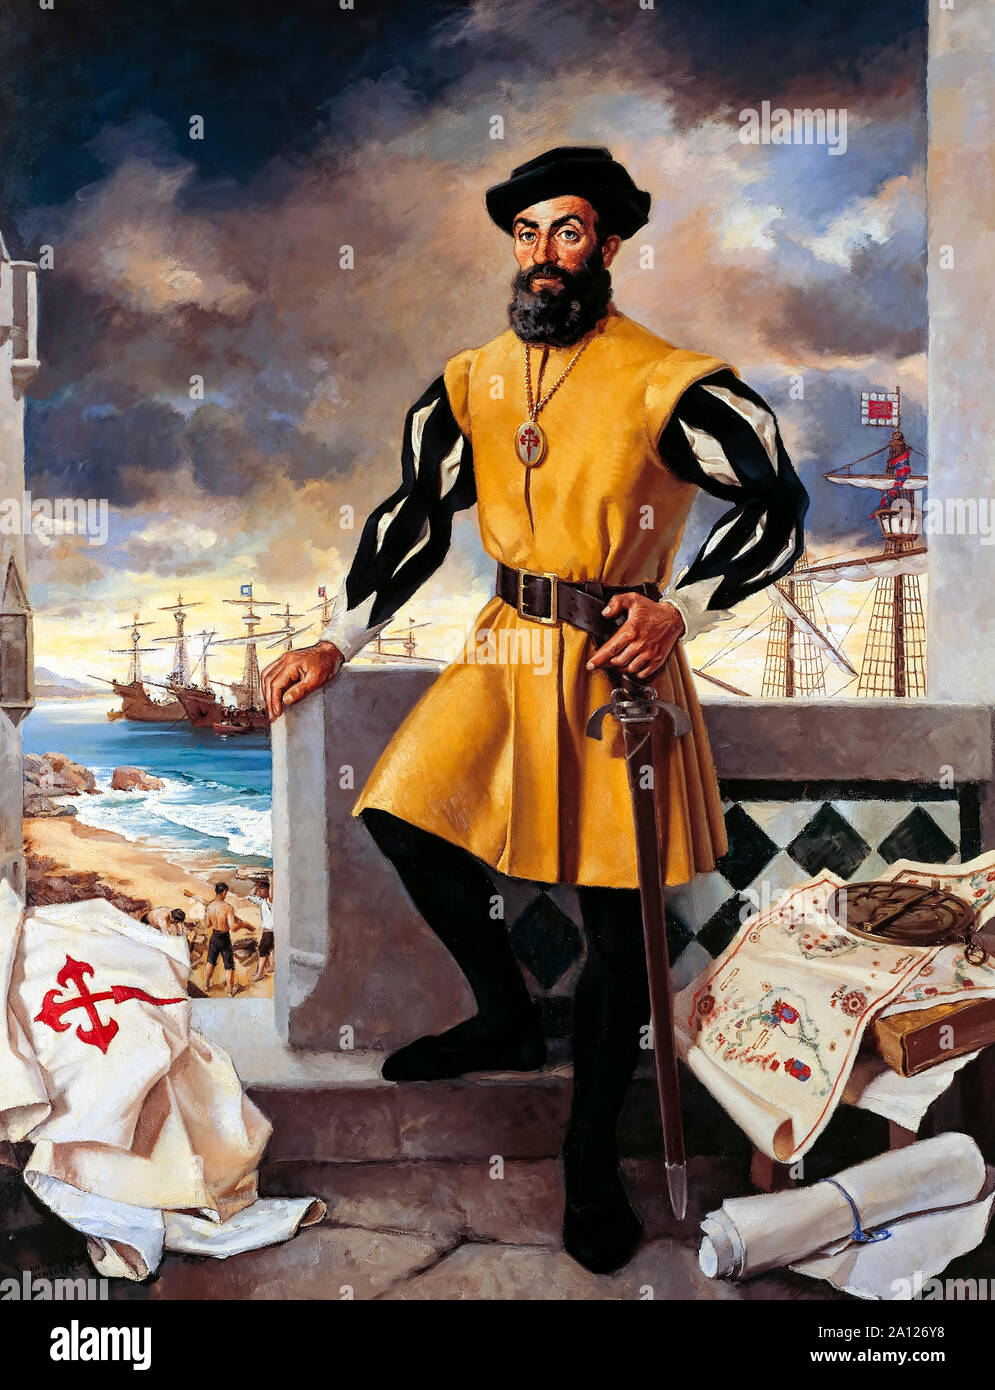 Ferdinand Magellan (1480-1521), Portuguese Explorer who headed the Spanish expedition to the East Indies from 1519 to 1522, resulting in the first circumnavigation of the Earth. Stock Photo